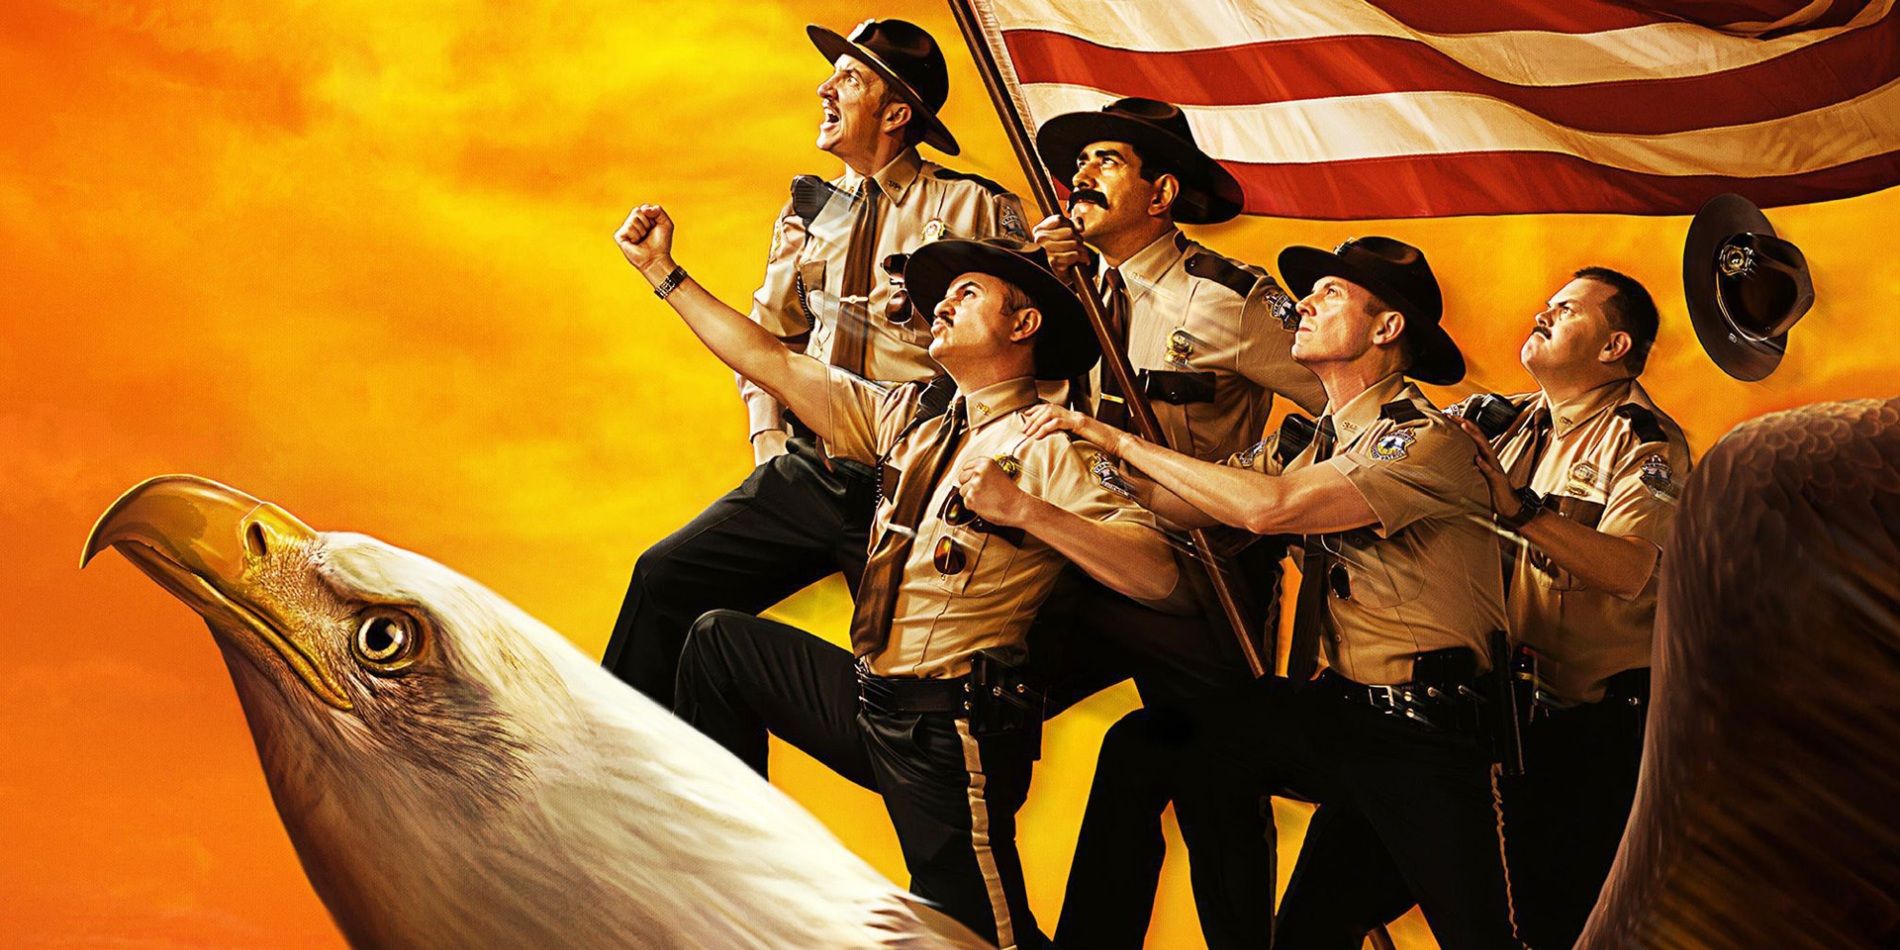 Super Troopers 3 Is Happening Release Date & Story Details